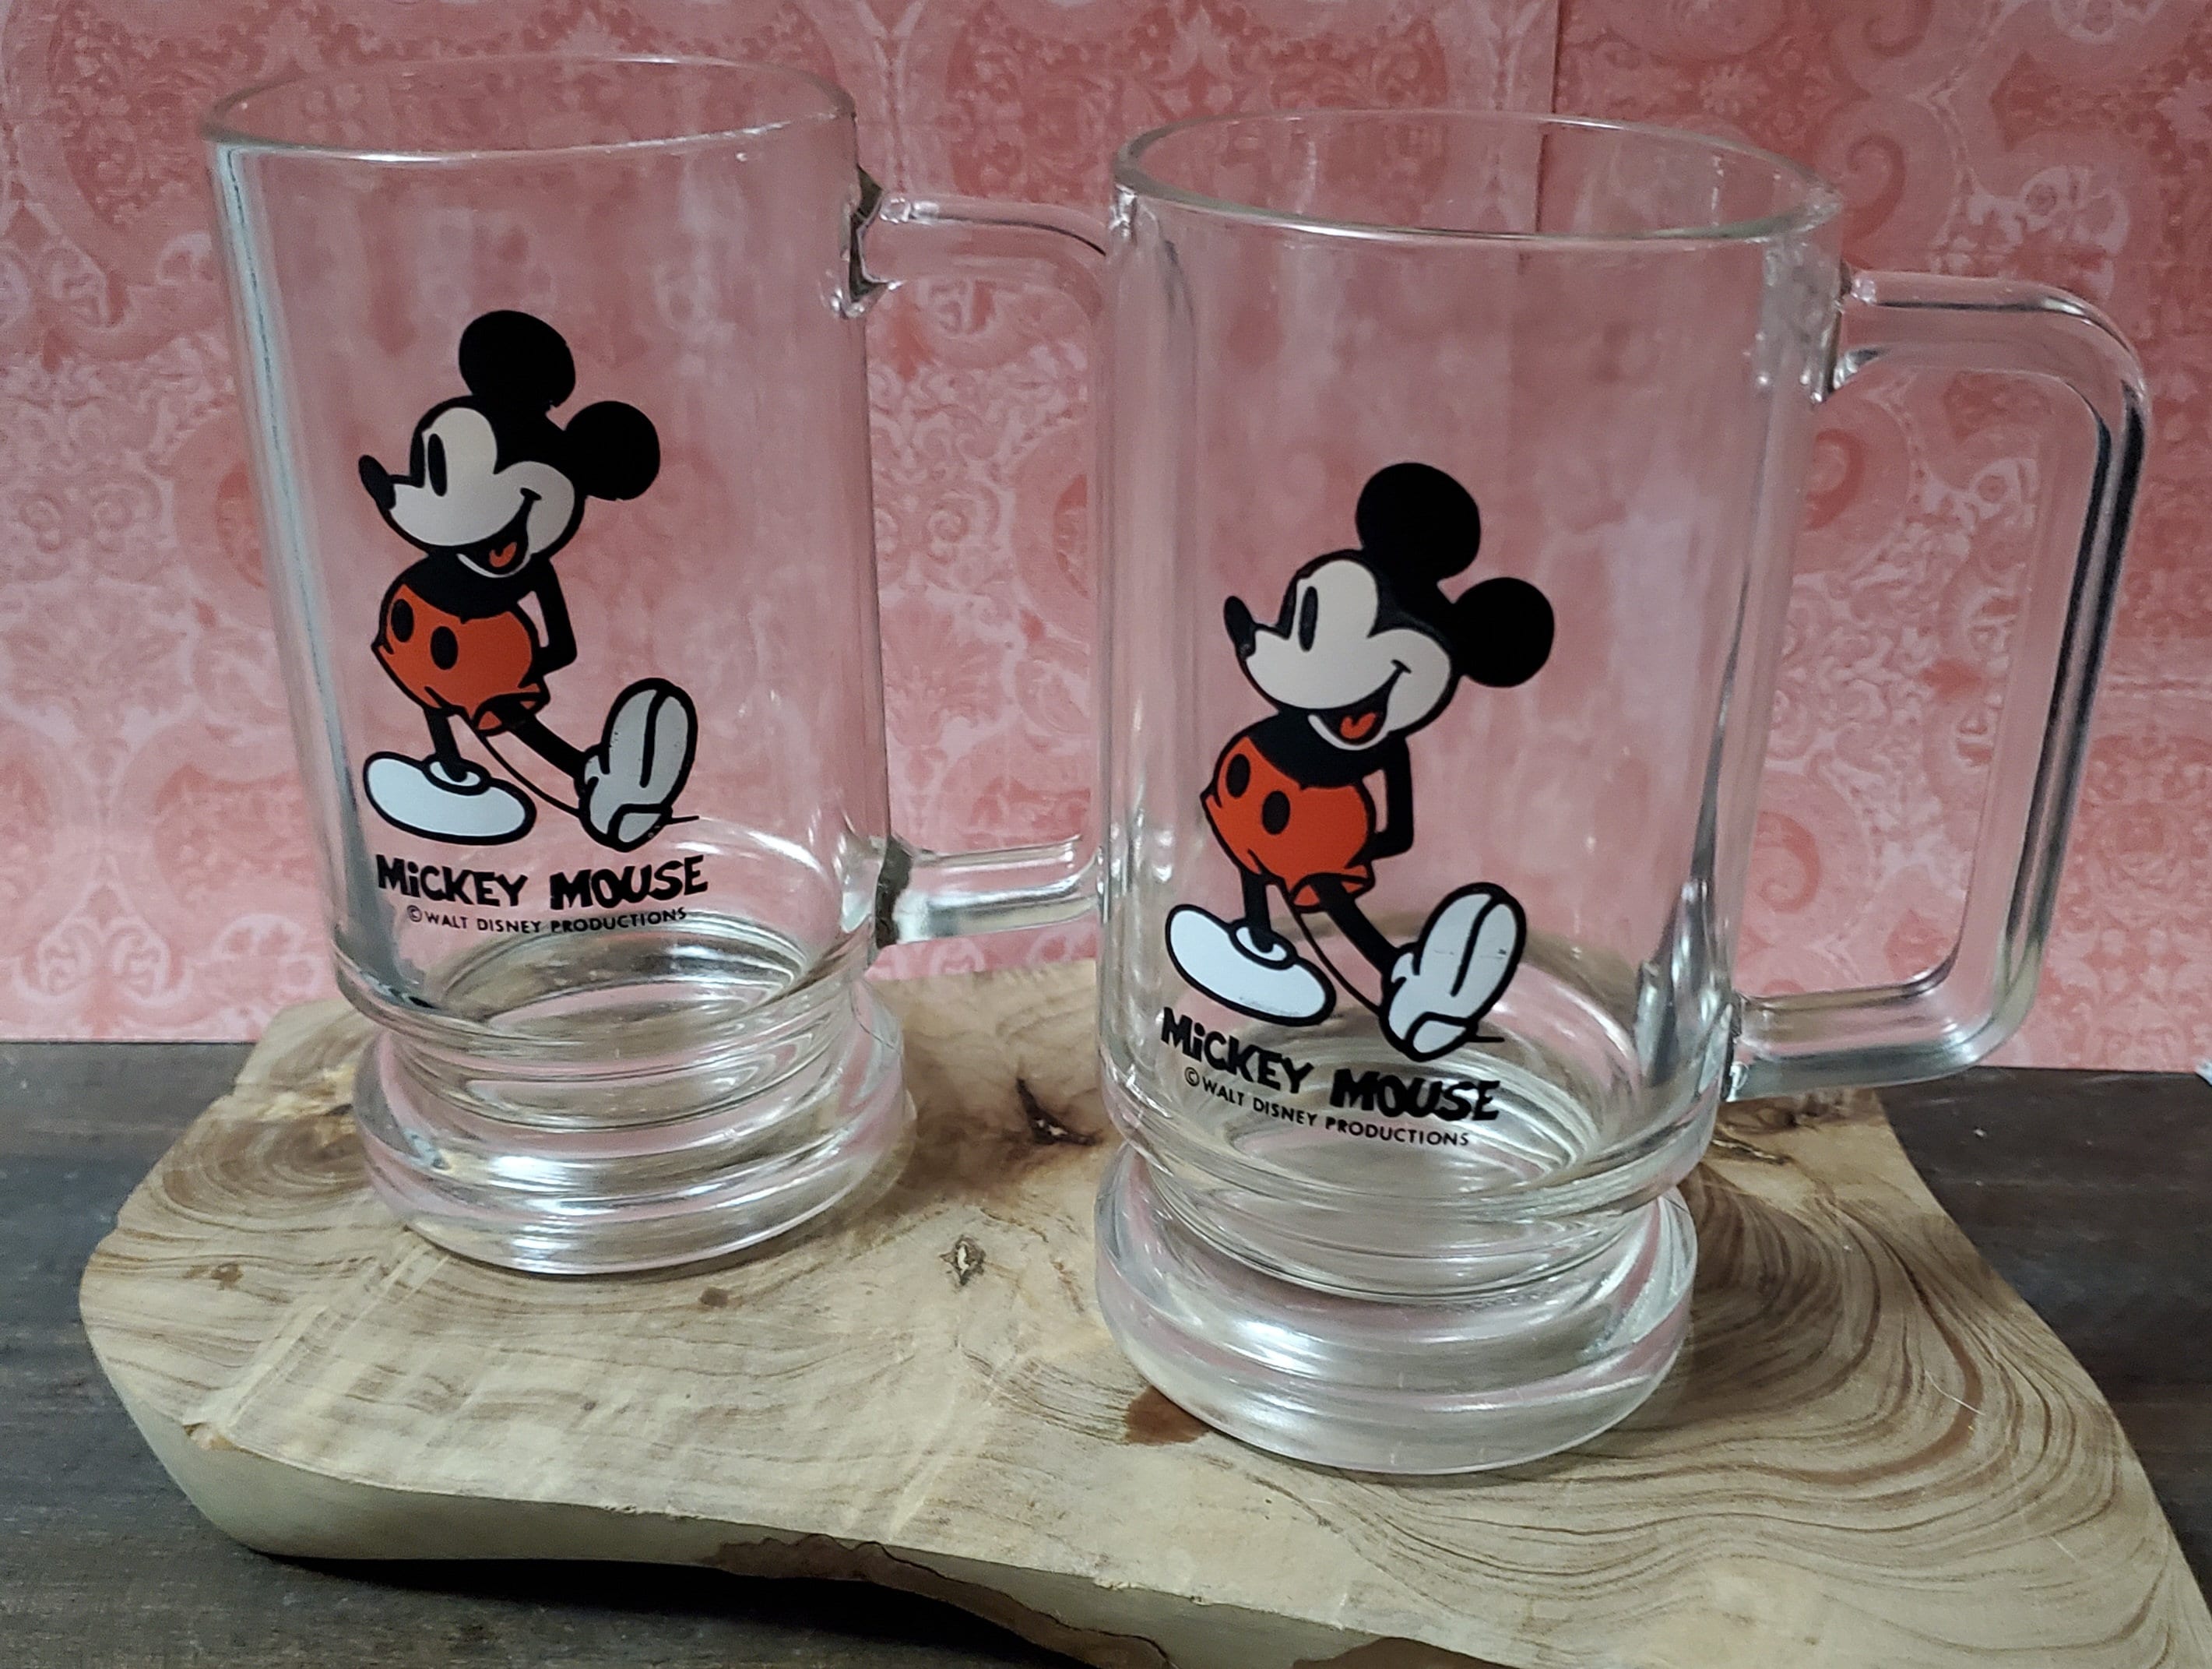 Vintage Mickey Mouse Glass Beer Mug - Cheers with Classic Disney Charm